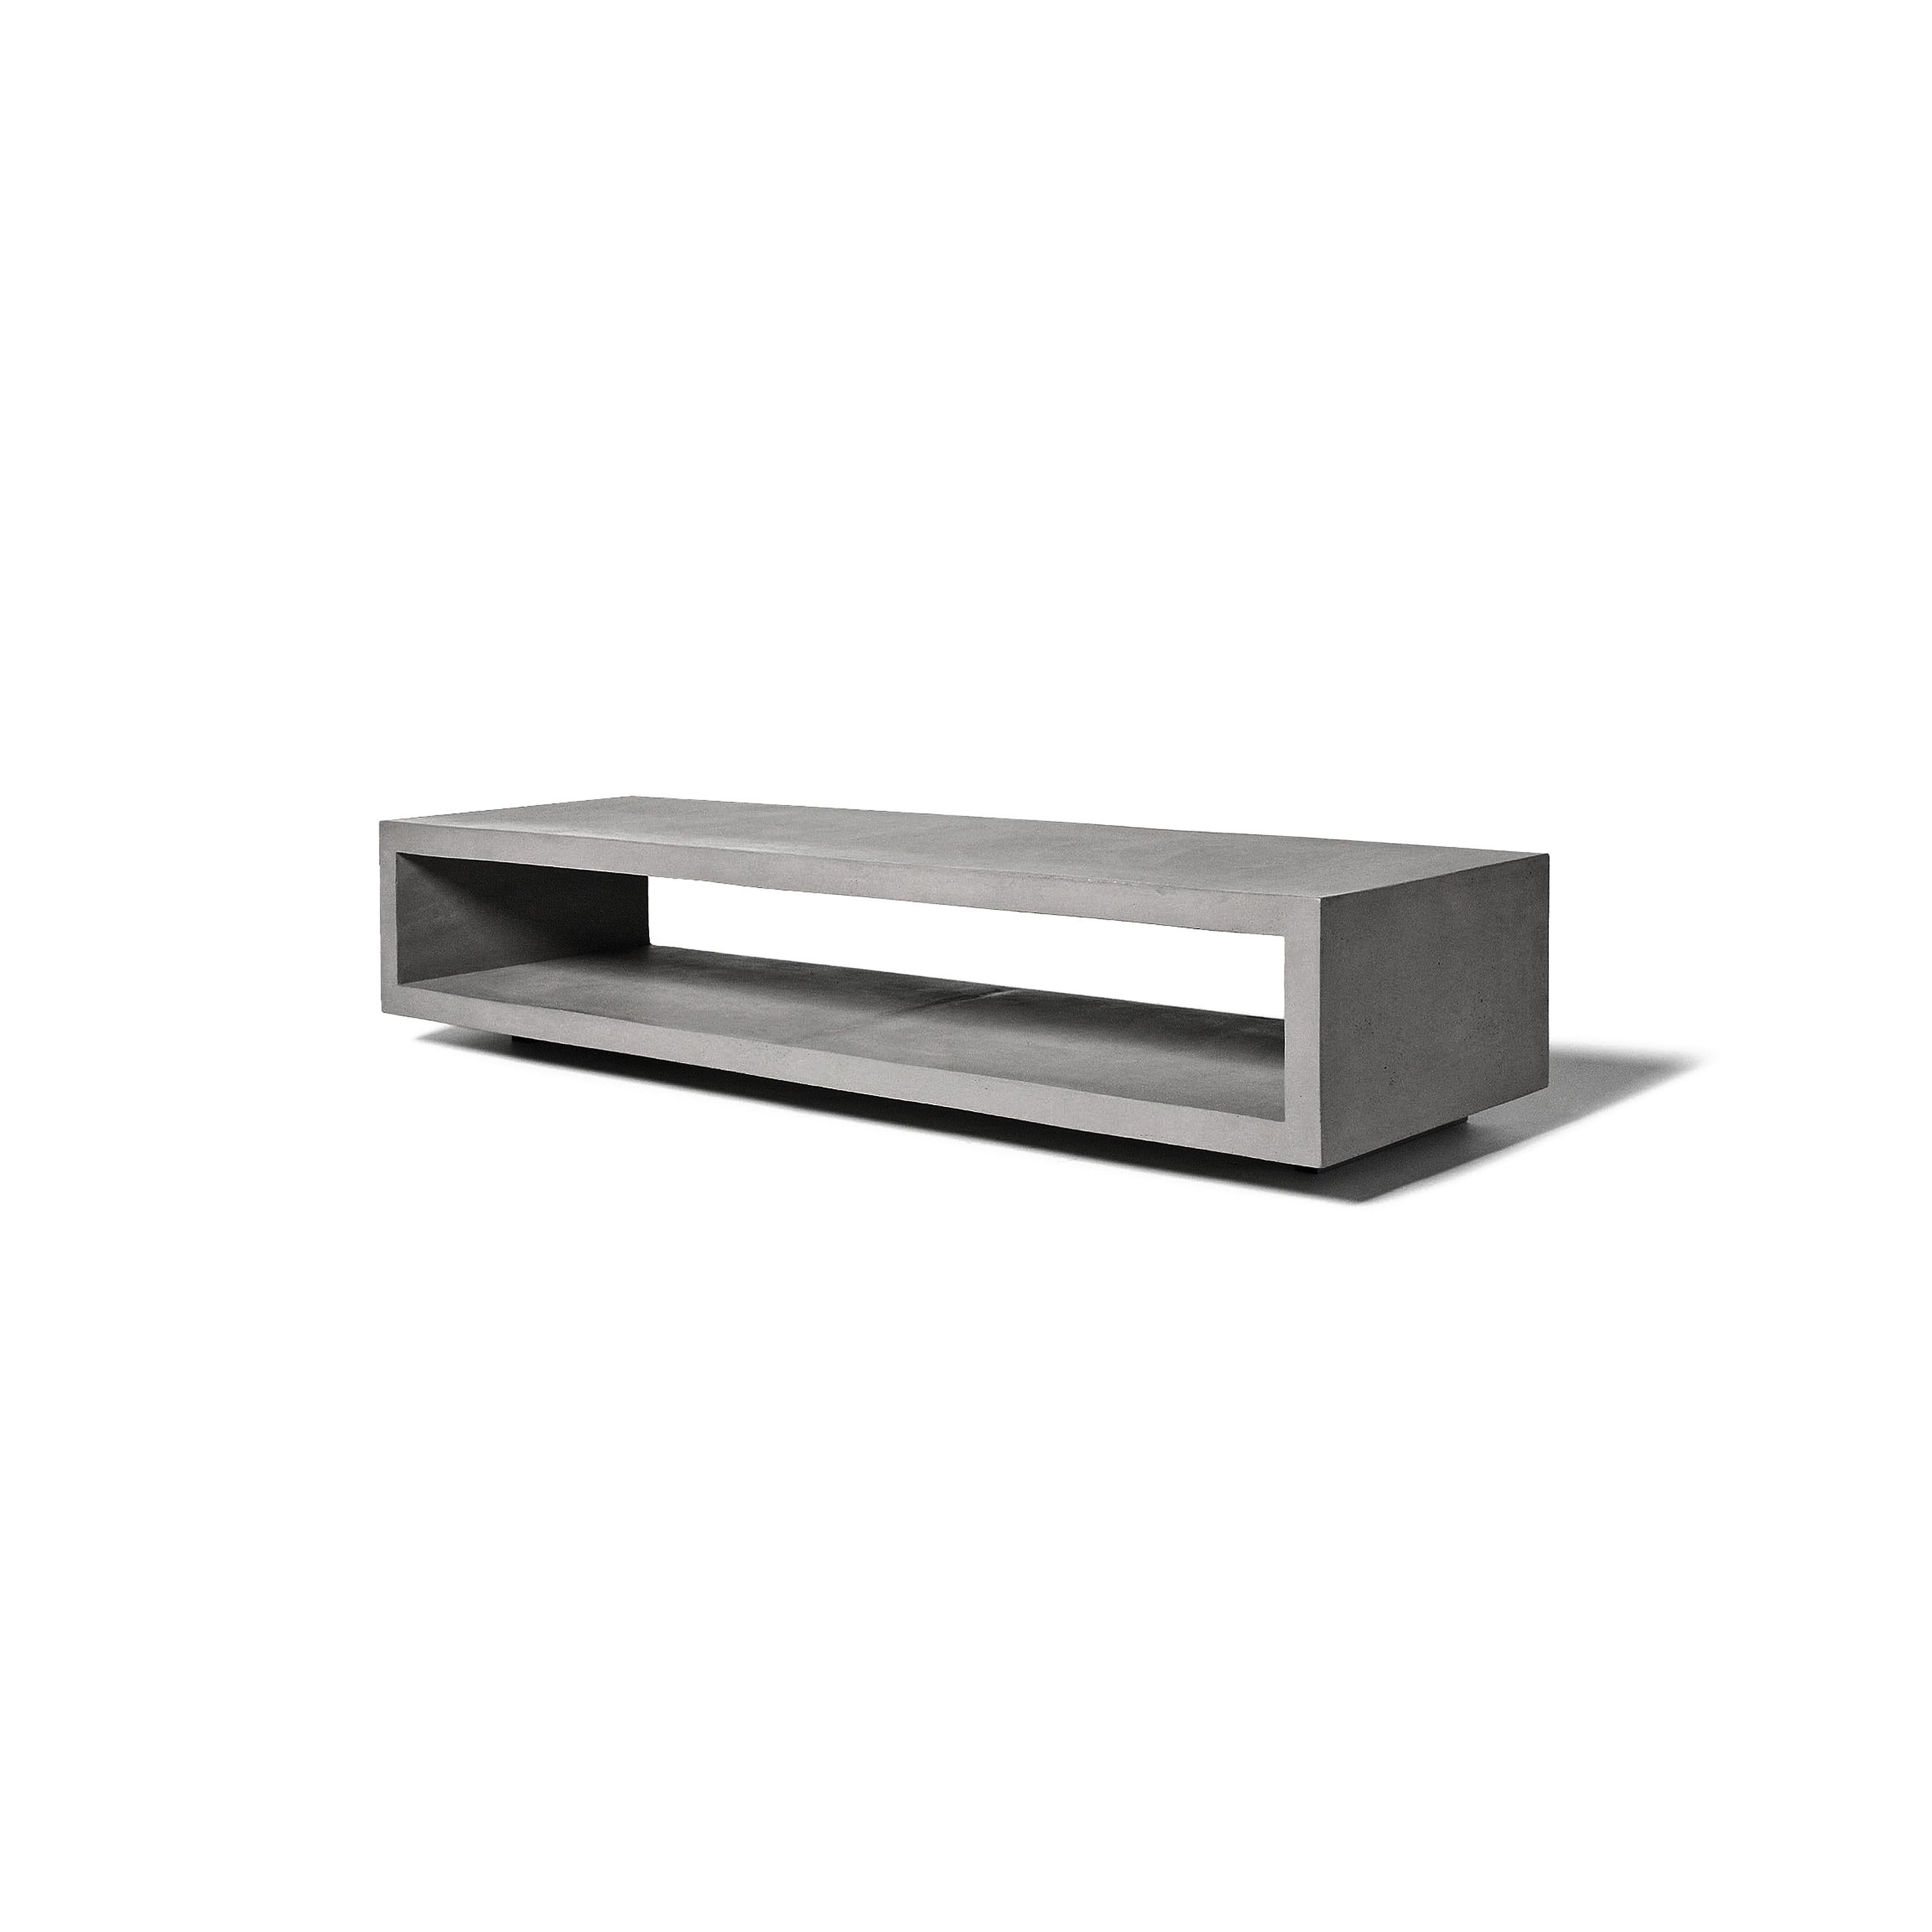 The Concrete Monobloc TV bench designed by Lyon Béton floats beautifully above the ground and is specially designed to accomodate your flat screen TV. Characterized by its clean lines, its straightforward geometric configuration, its simplistic